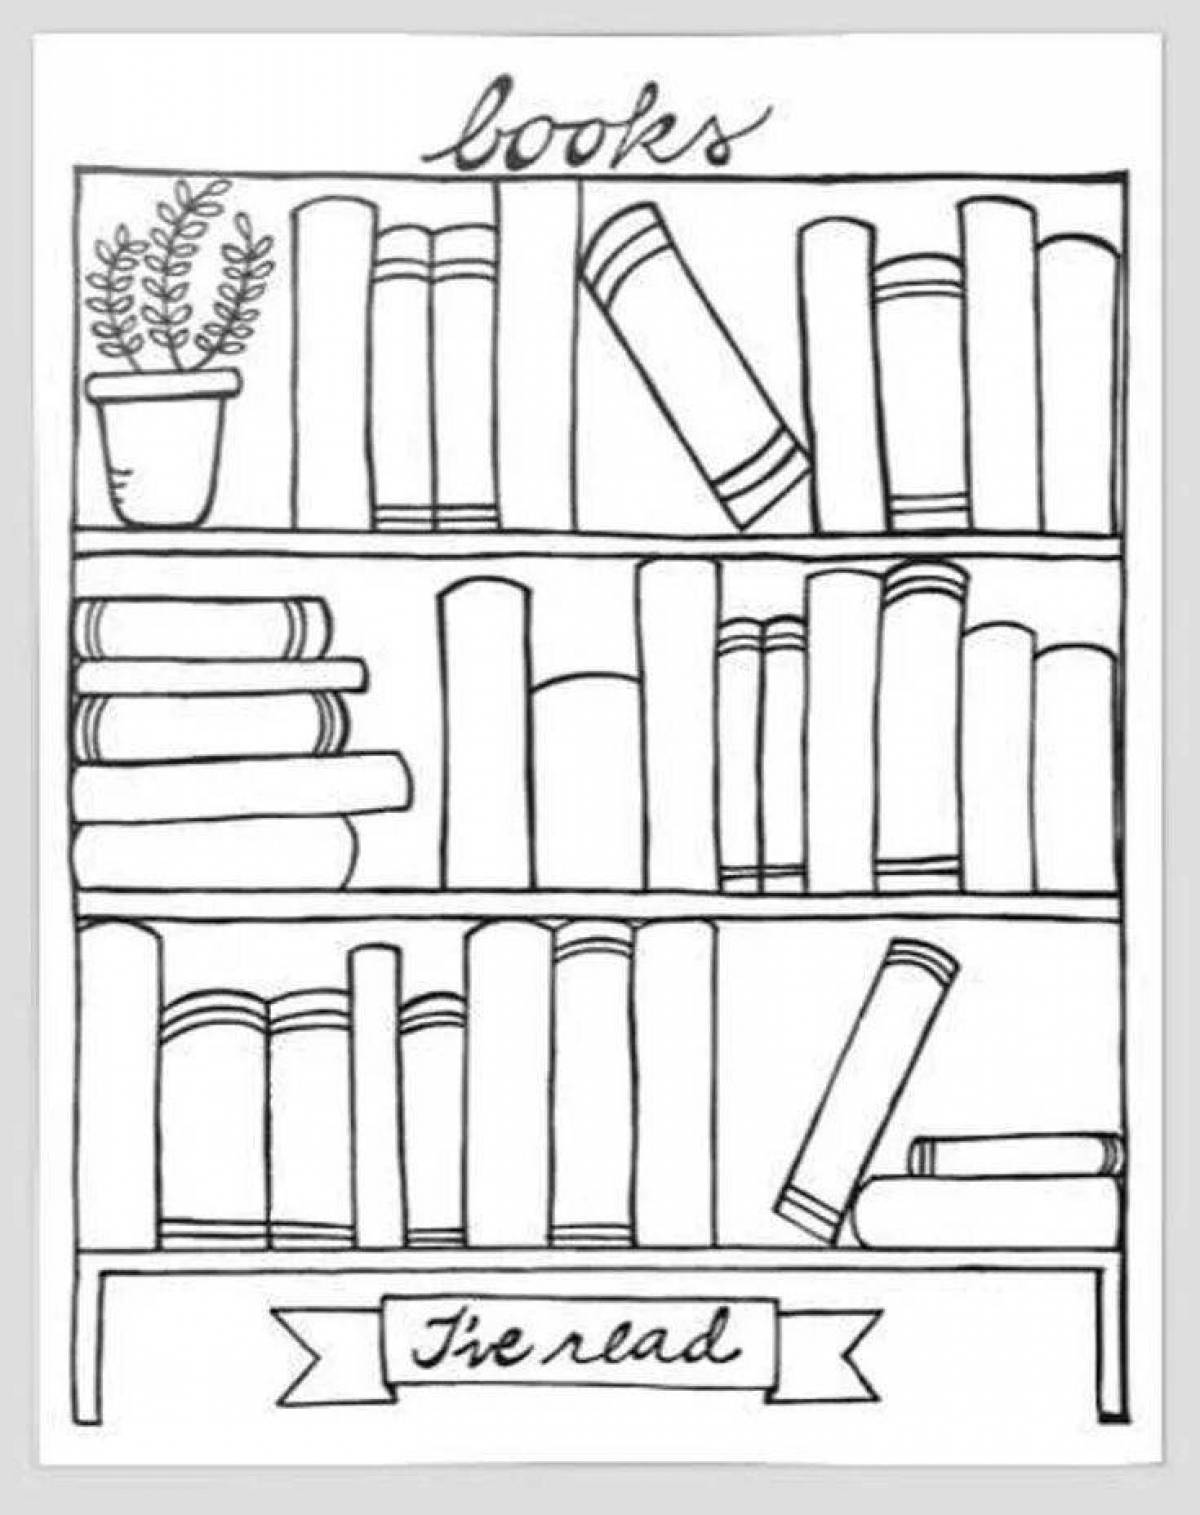 Coloring book funny shelf with books